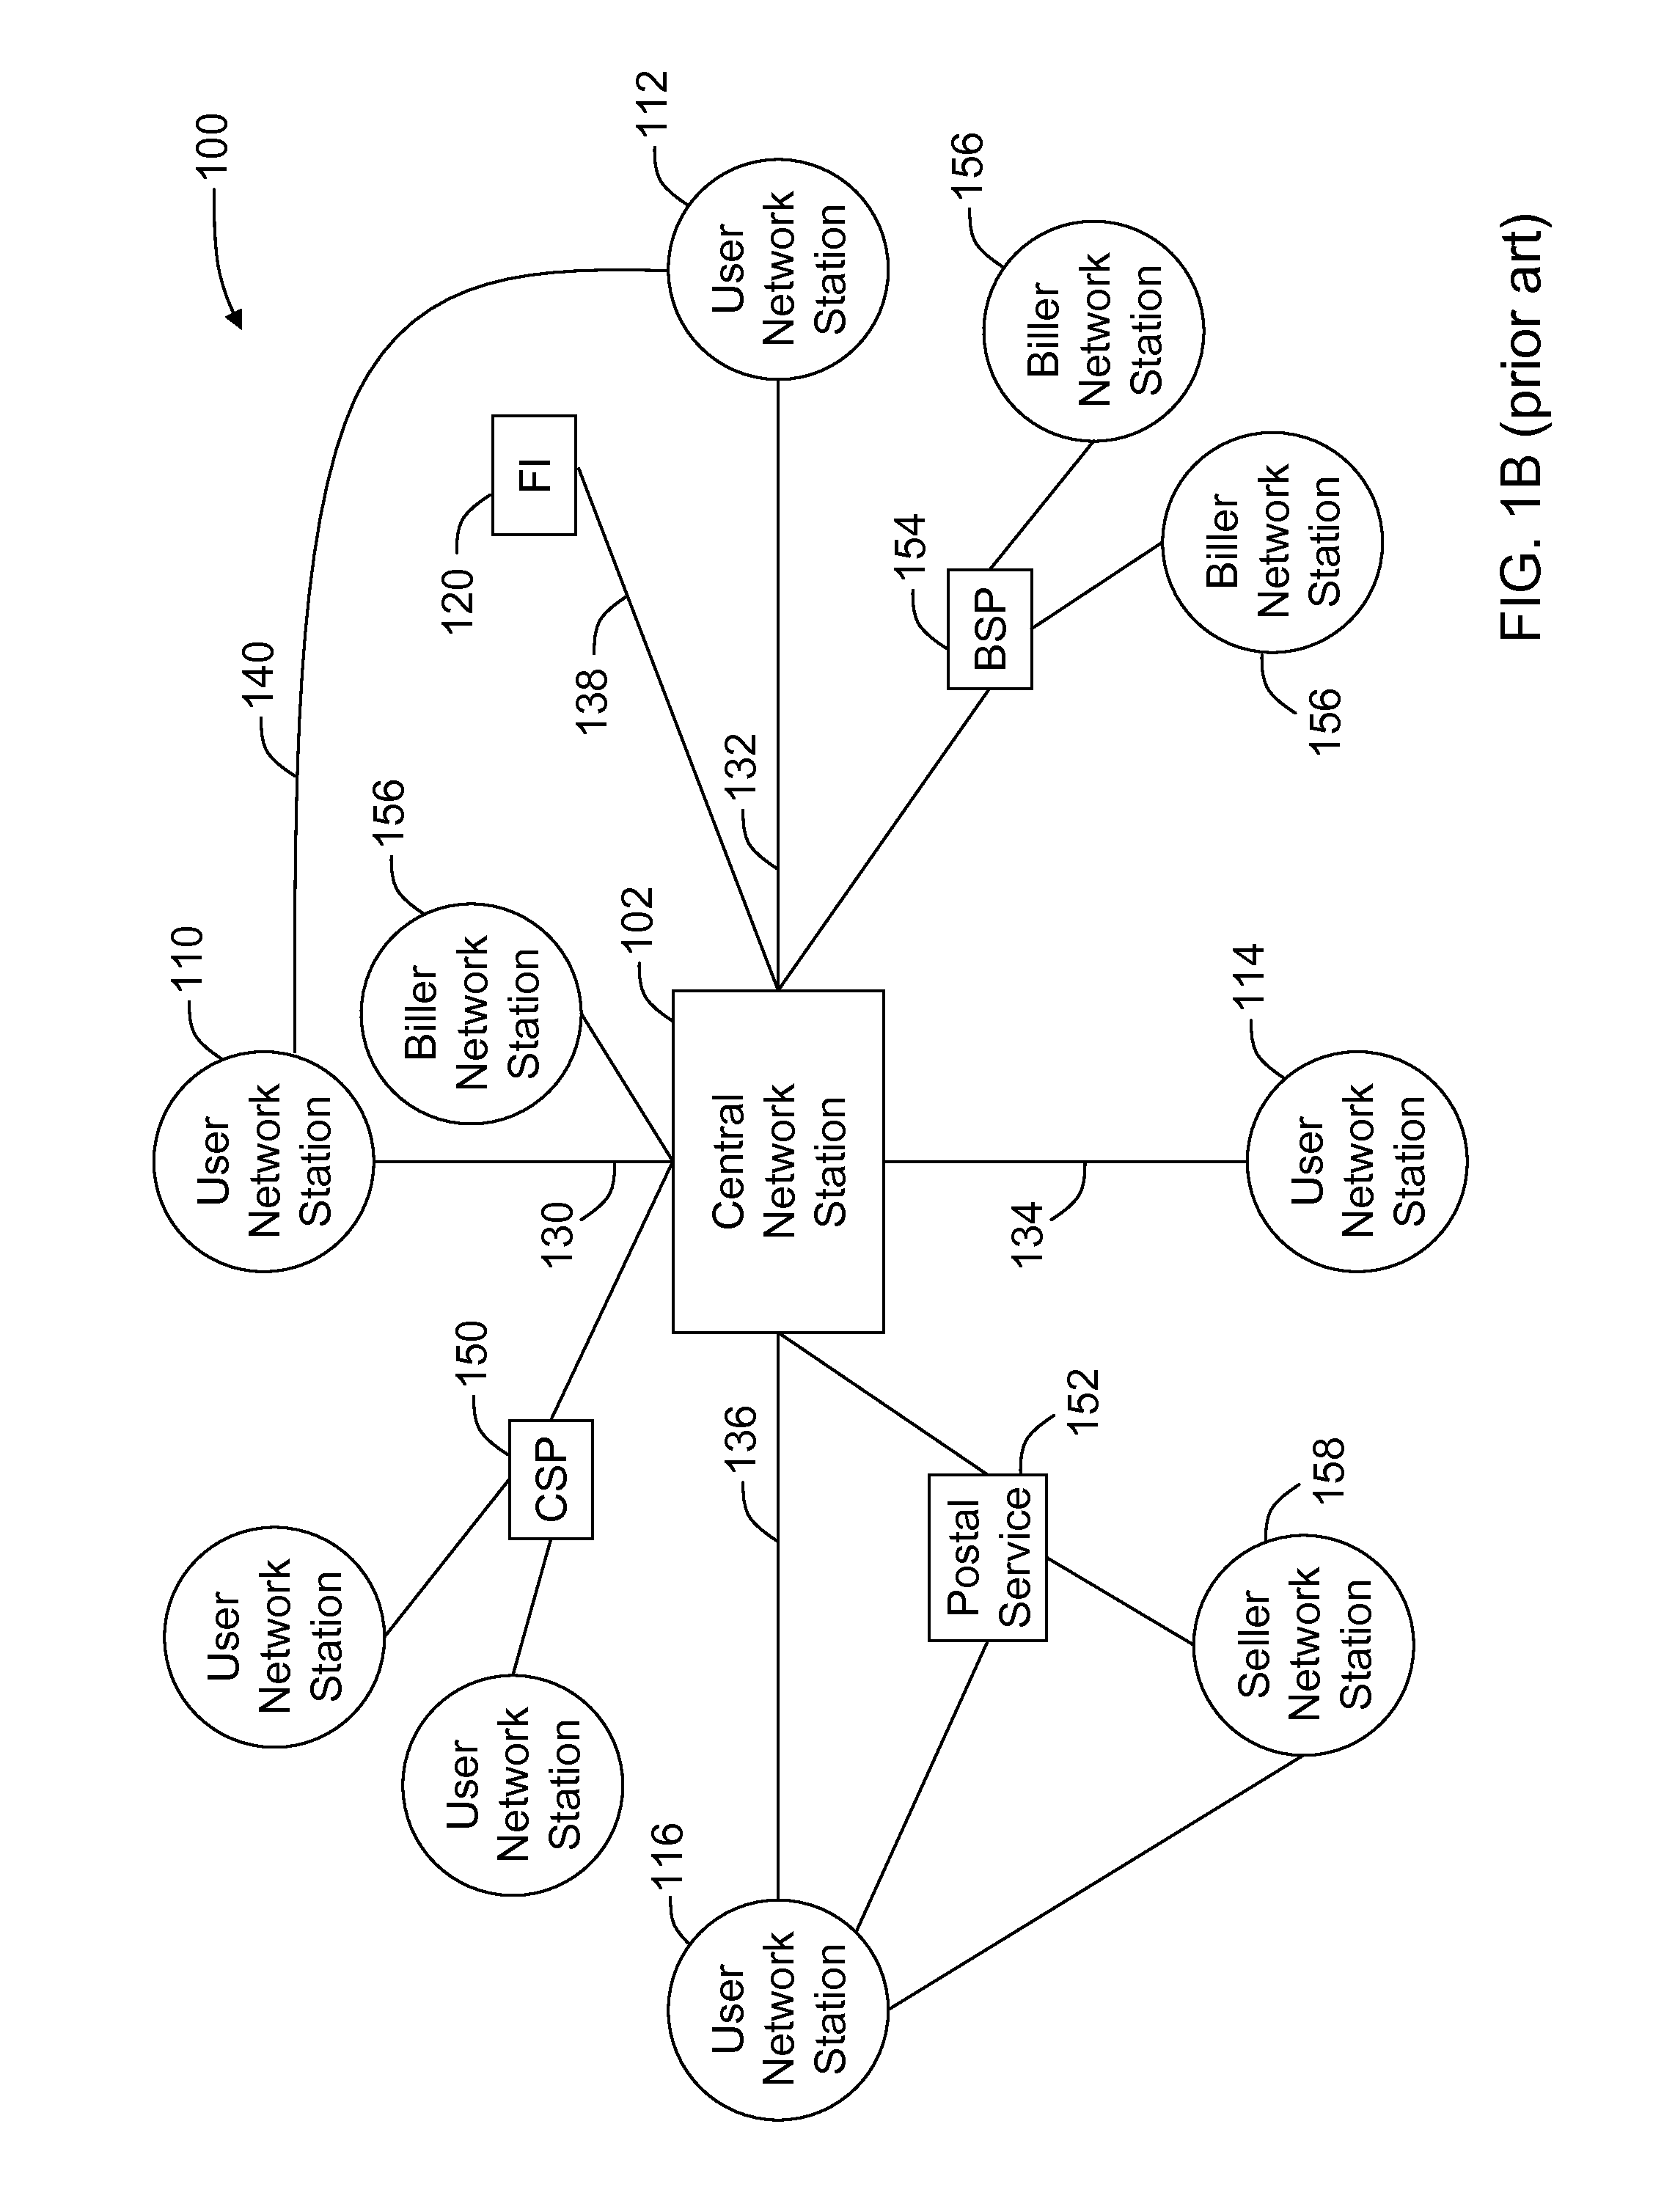 Methods and systems for biller-initiated reporting of payment transactions